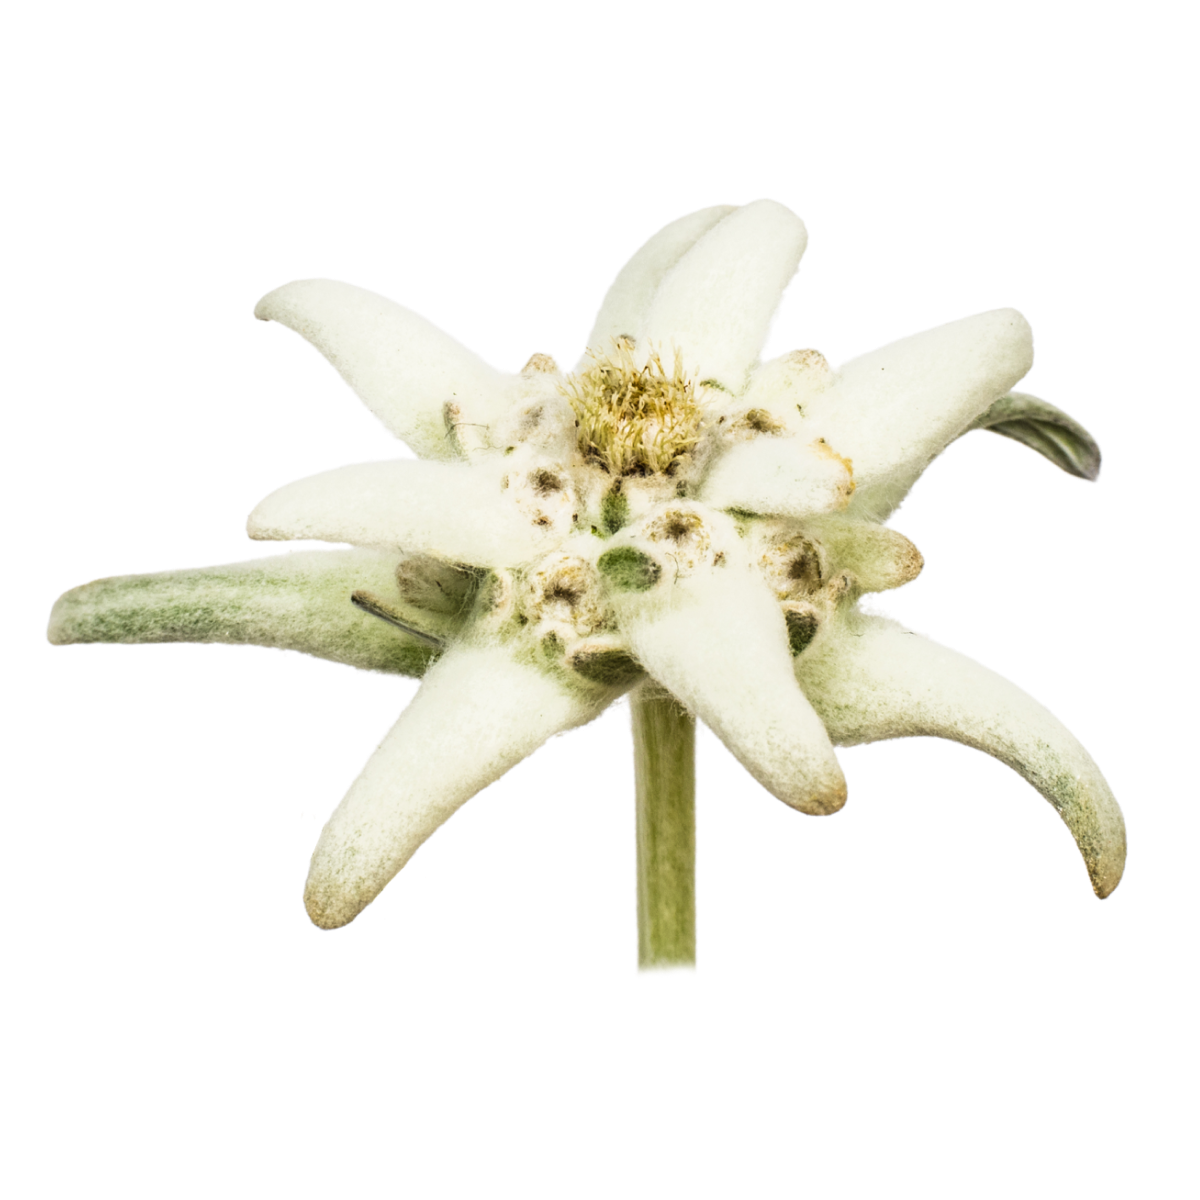 Edelweiss Culture Extract